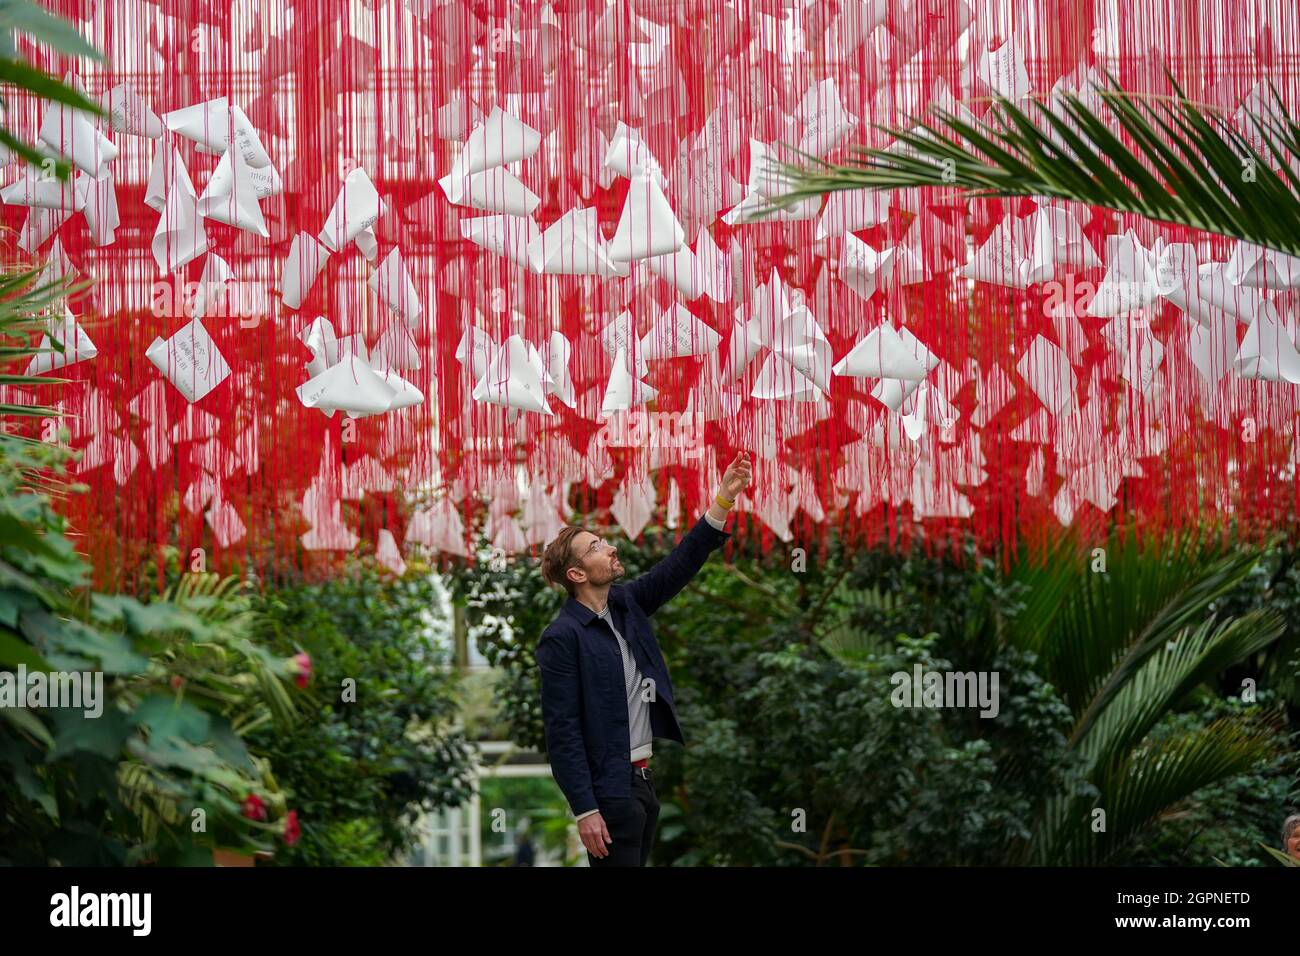 Paul Denton, Head of visitor programmes and exhibitions for Royal Botanic Gardens Kew, looks at the centrepiece called 'One Thousand Springs' created by Japanese artist Chiharu Shiota during a photocall for the Japan Festival, which is a celebration of the country's breath-taking plants, art and culture, at the Royal Botanic Gardens, Kew, London. Picture date: Thursday September 30, 2021. Stock Photo